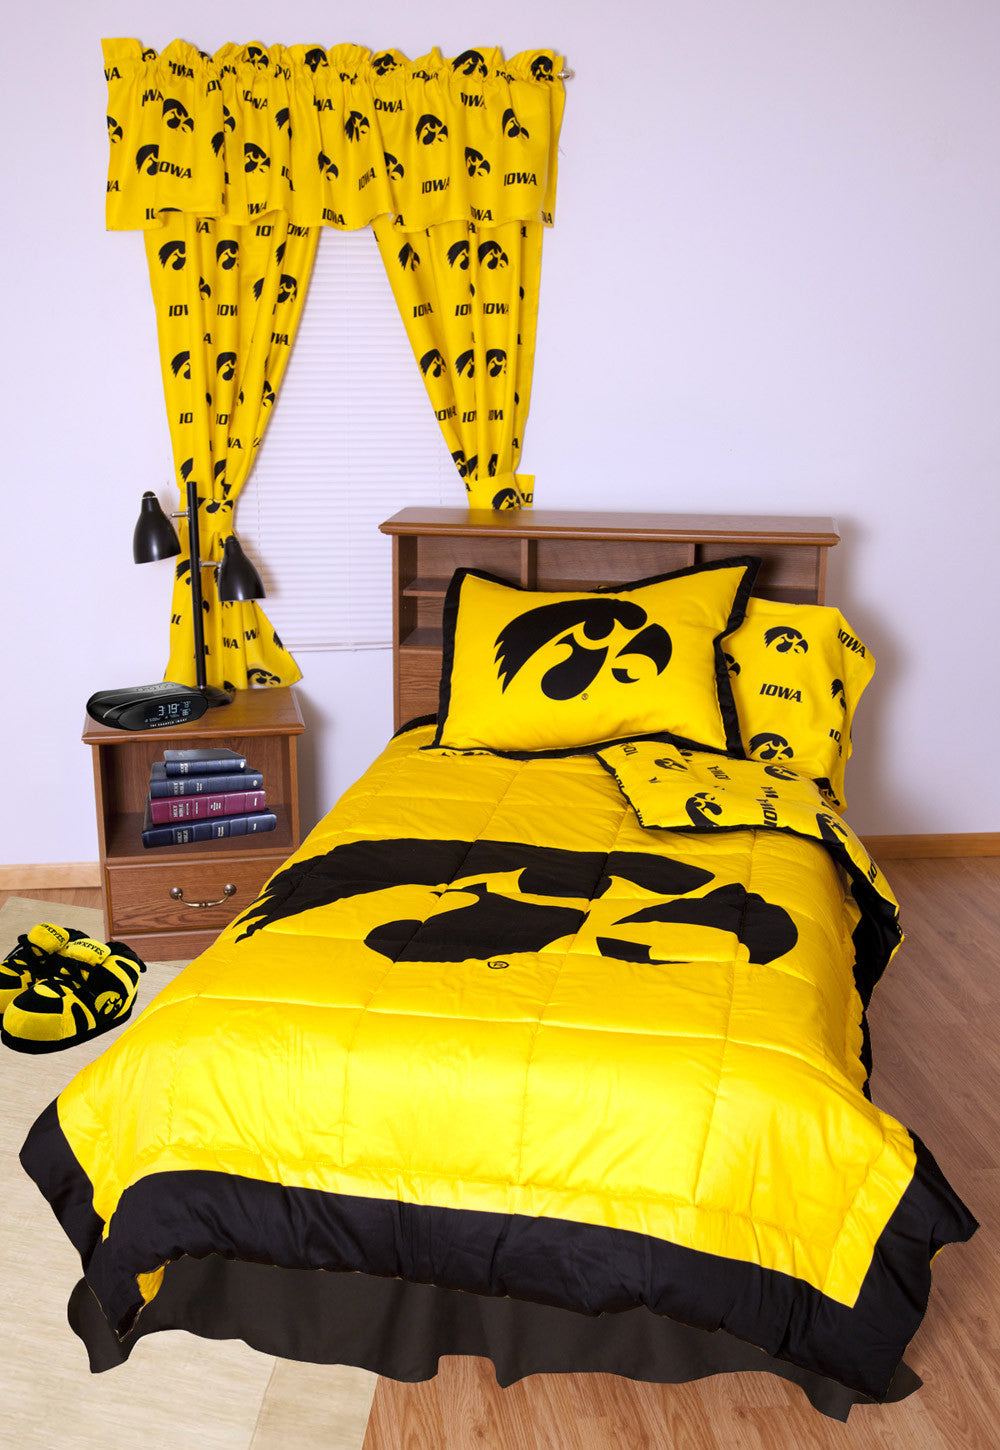 Iowa Bed In A Bag King - With Team Colored Sheets - Iowbbkg By College Covers